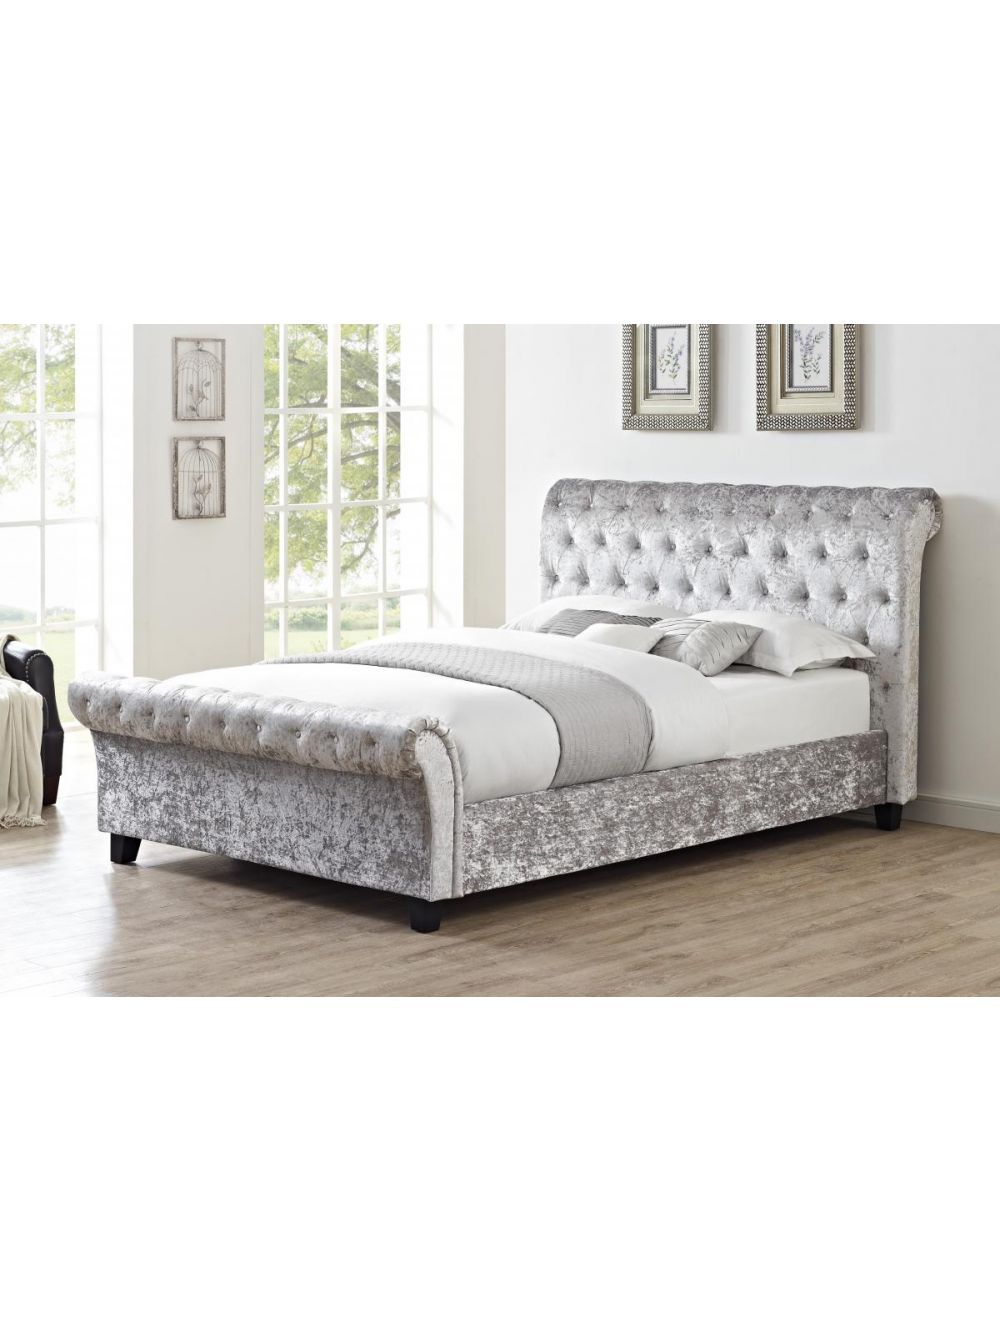 Casablanca High Foot End King Size Bed, High King Size Bed